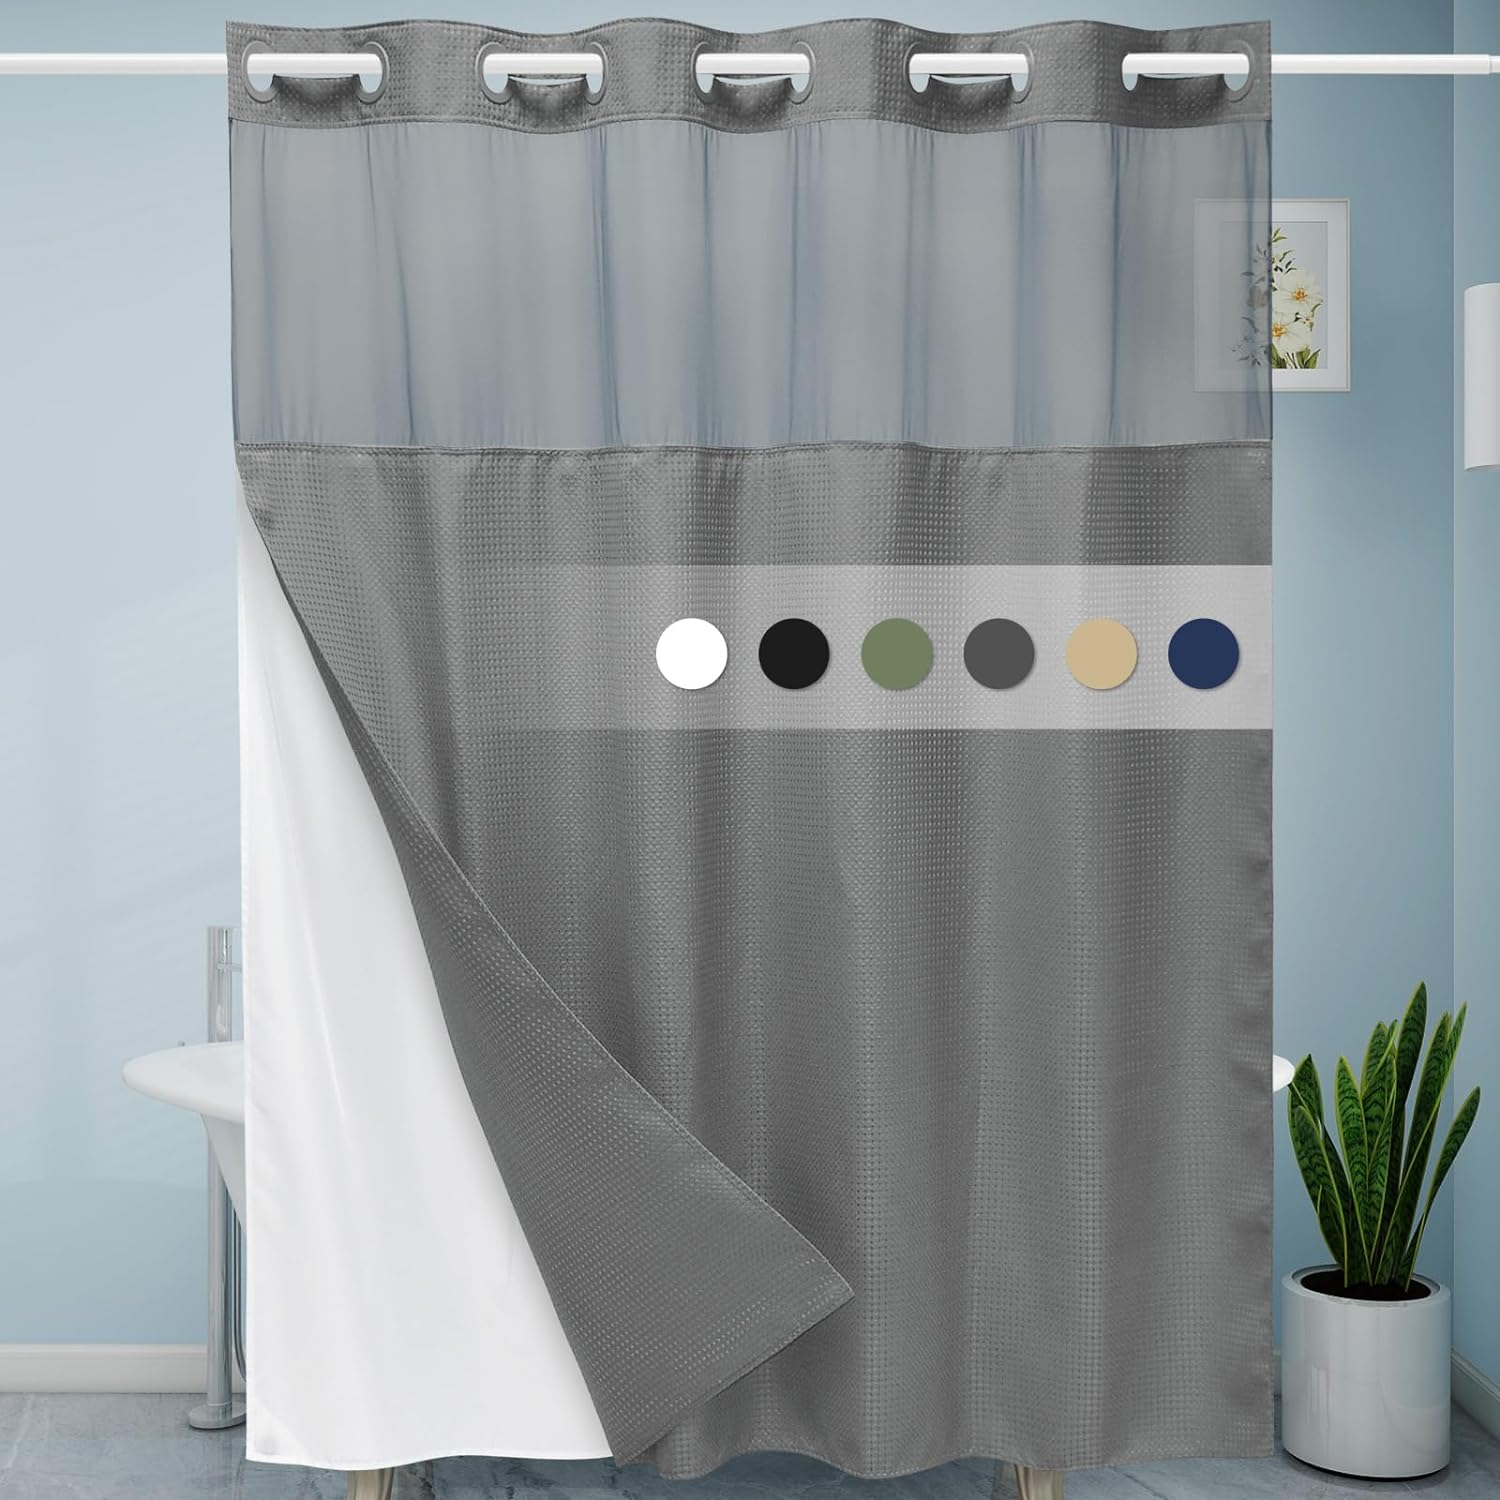 EUTXL Grey Shower Curtain and Liner Set - 230GSM Waffle Weave Textured Heavy Duty,Hotel Luxury Weighted Bath Curtain,71W x 74H